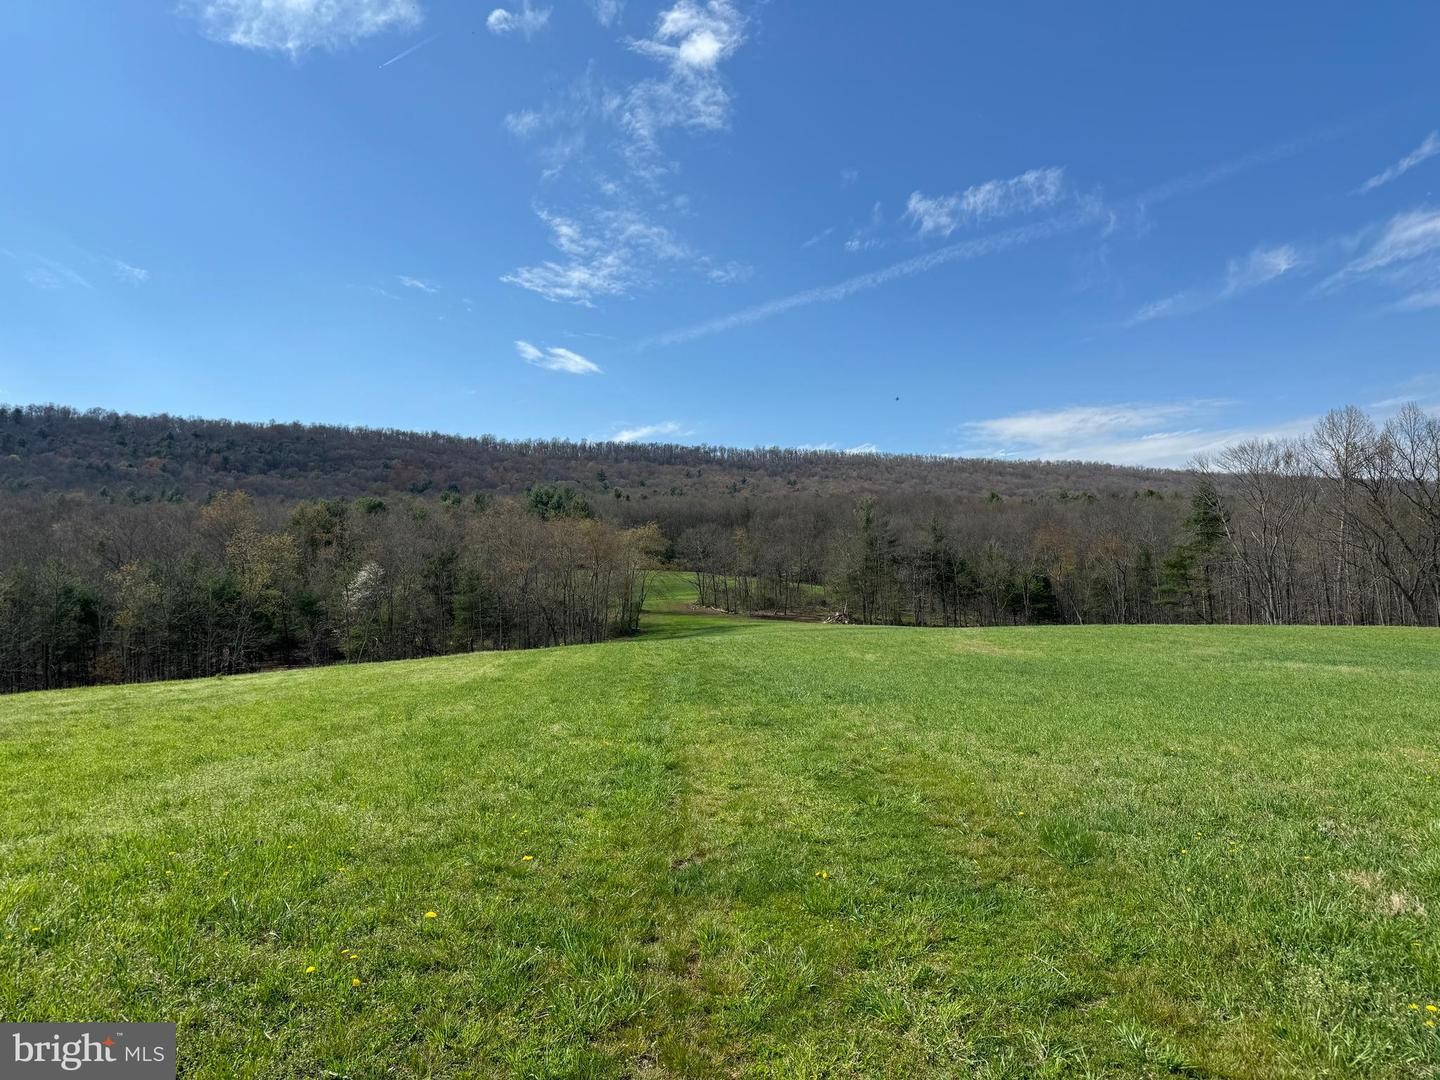 51. Tract 3: 15.67+/- Acres S Valley Rd